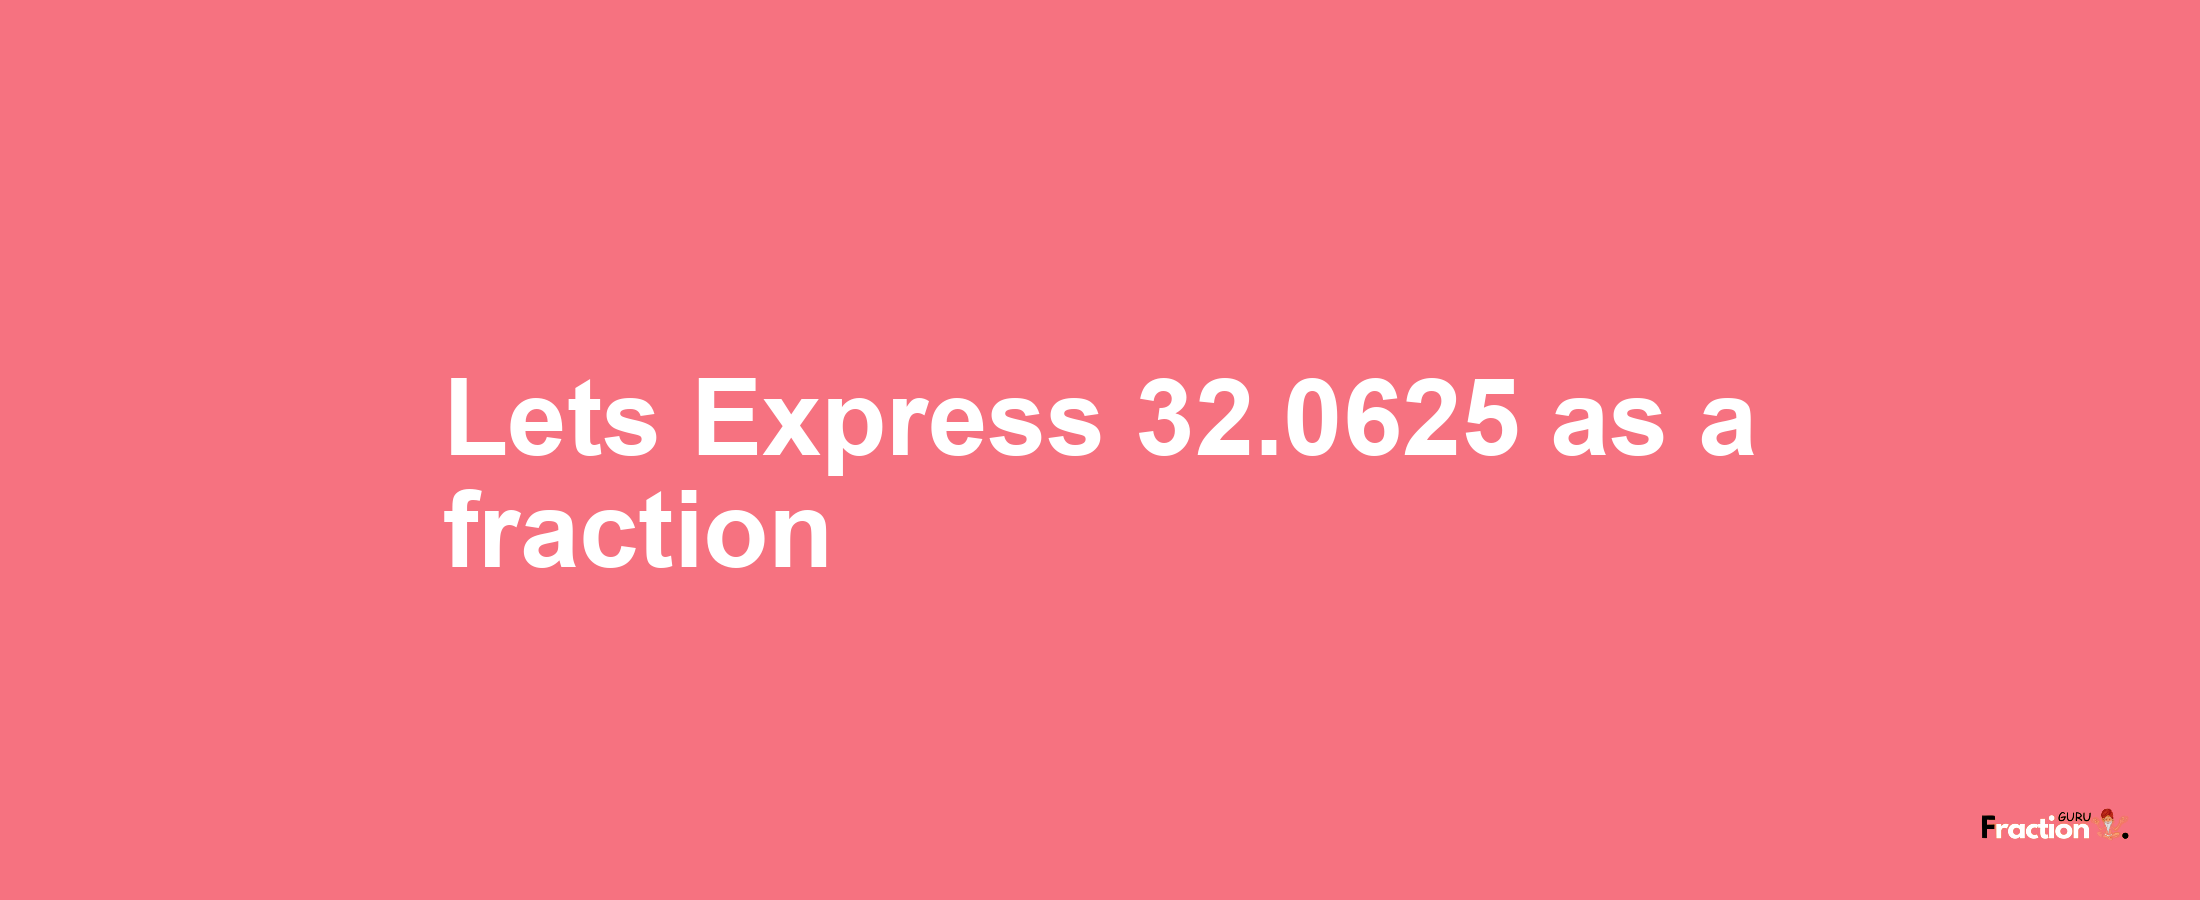 Lets Express 32.0625 as afraction